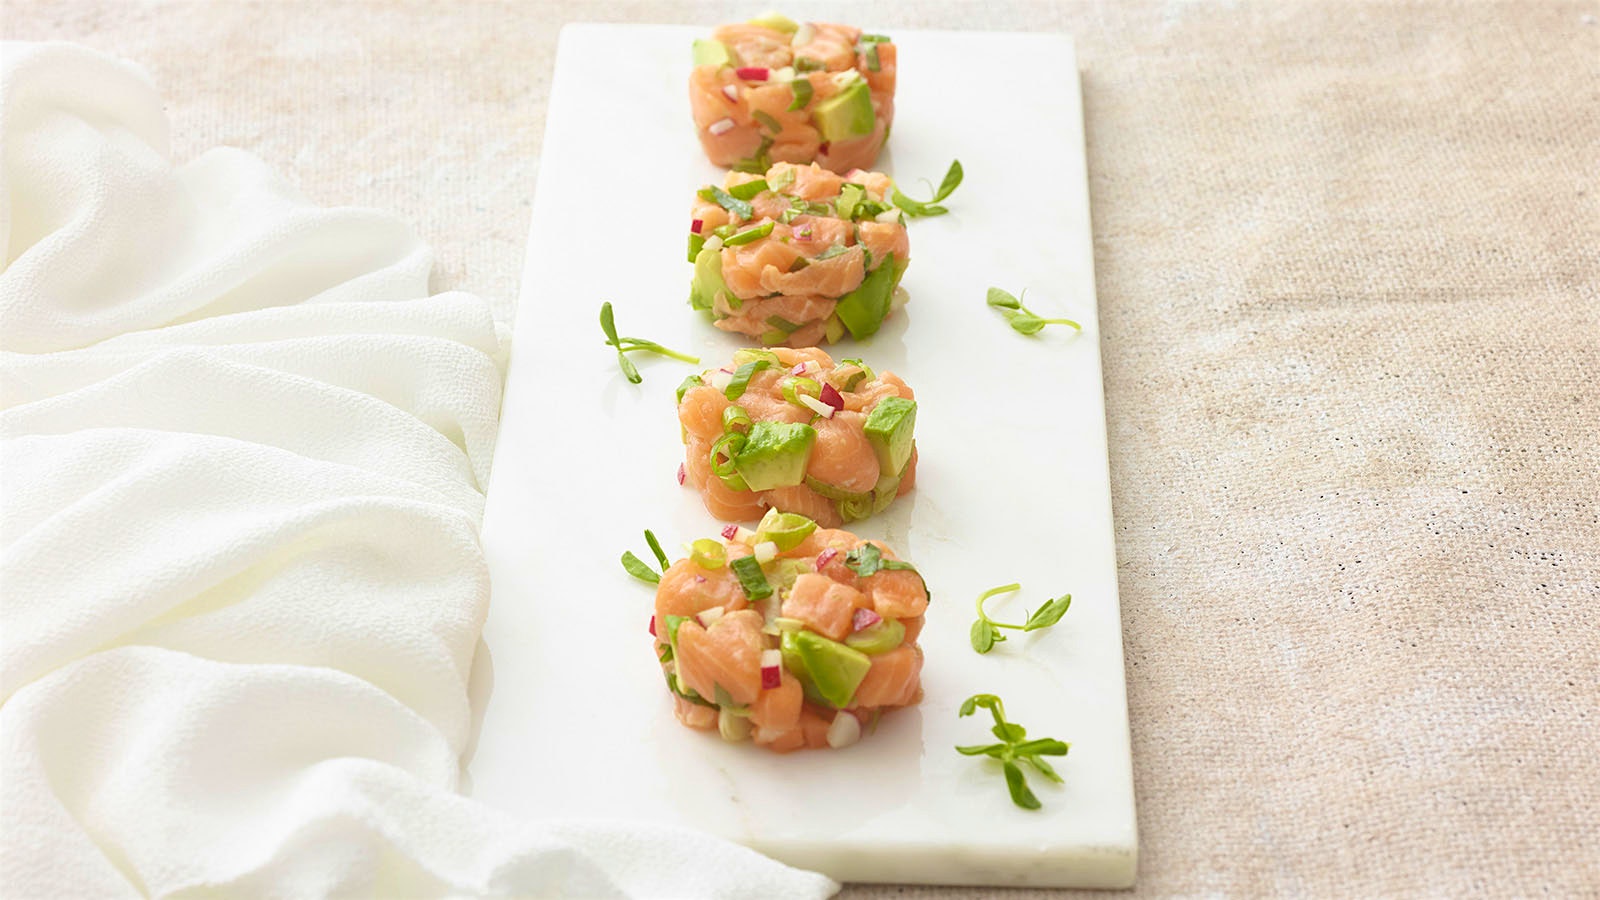  A serving plate with four discs of salmon and avocado tartare garnished with spring green 